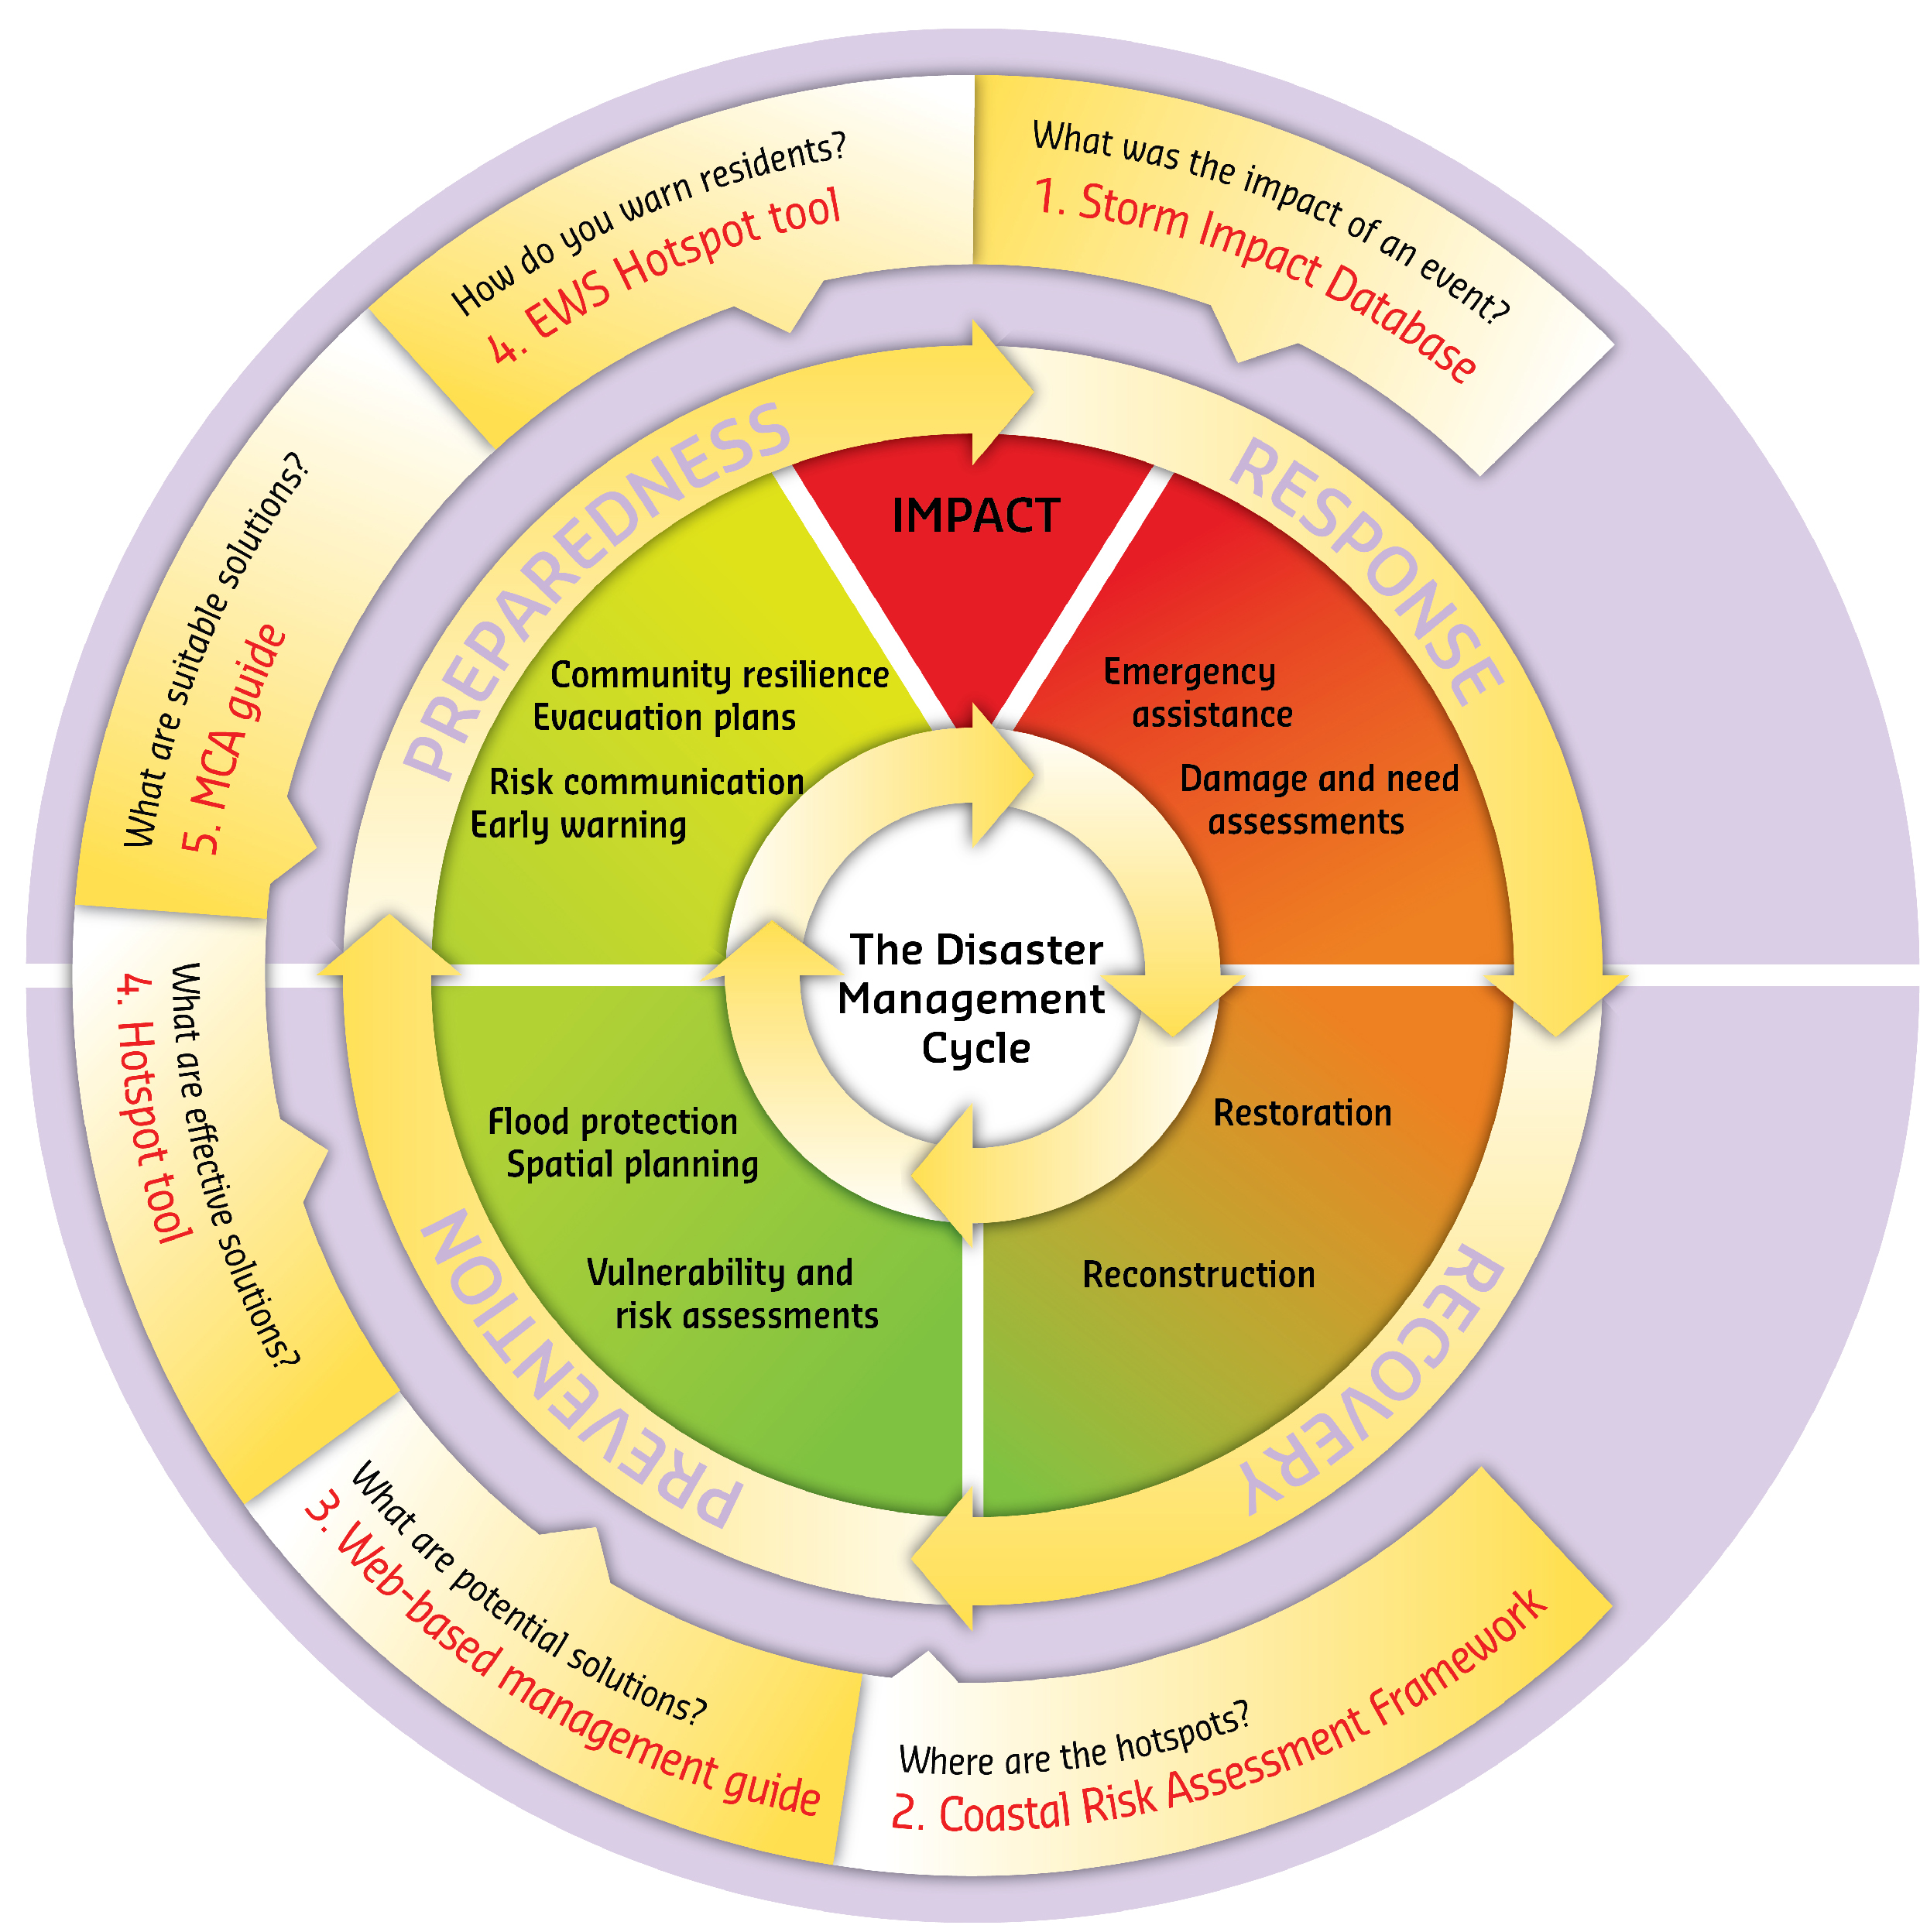 The Disaster Management Cycle, describing the Response, Recovery, Prevention and Preparedness stages, and the place of the RISC-KIT tools in this cycle (by von Dongeren et al. (forthcoming) and adapted from an original by and courtesy of Mr. C. van de Guchte, Deltares)